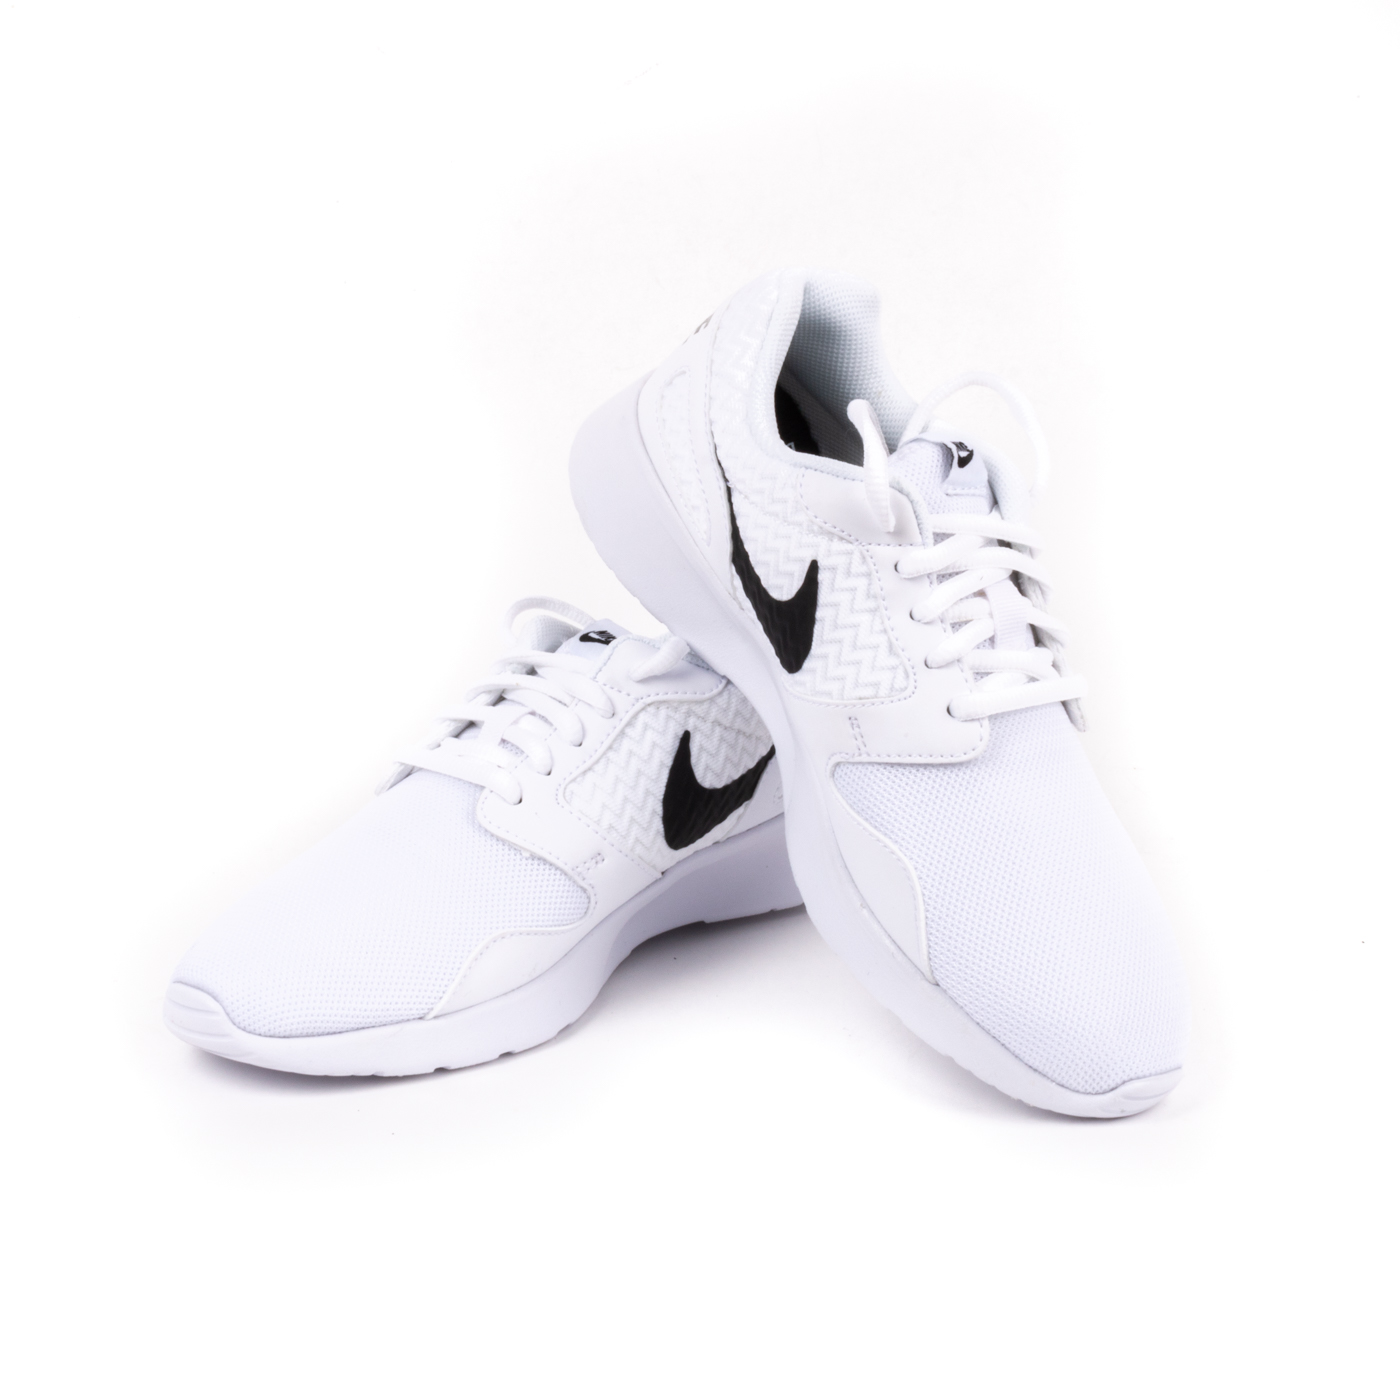 sneakers nike donna